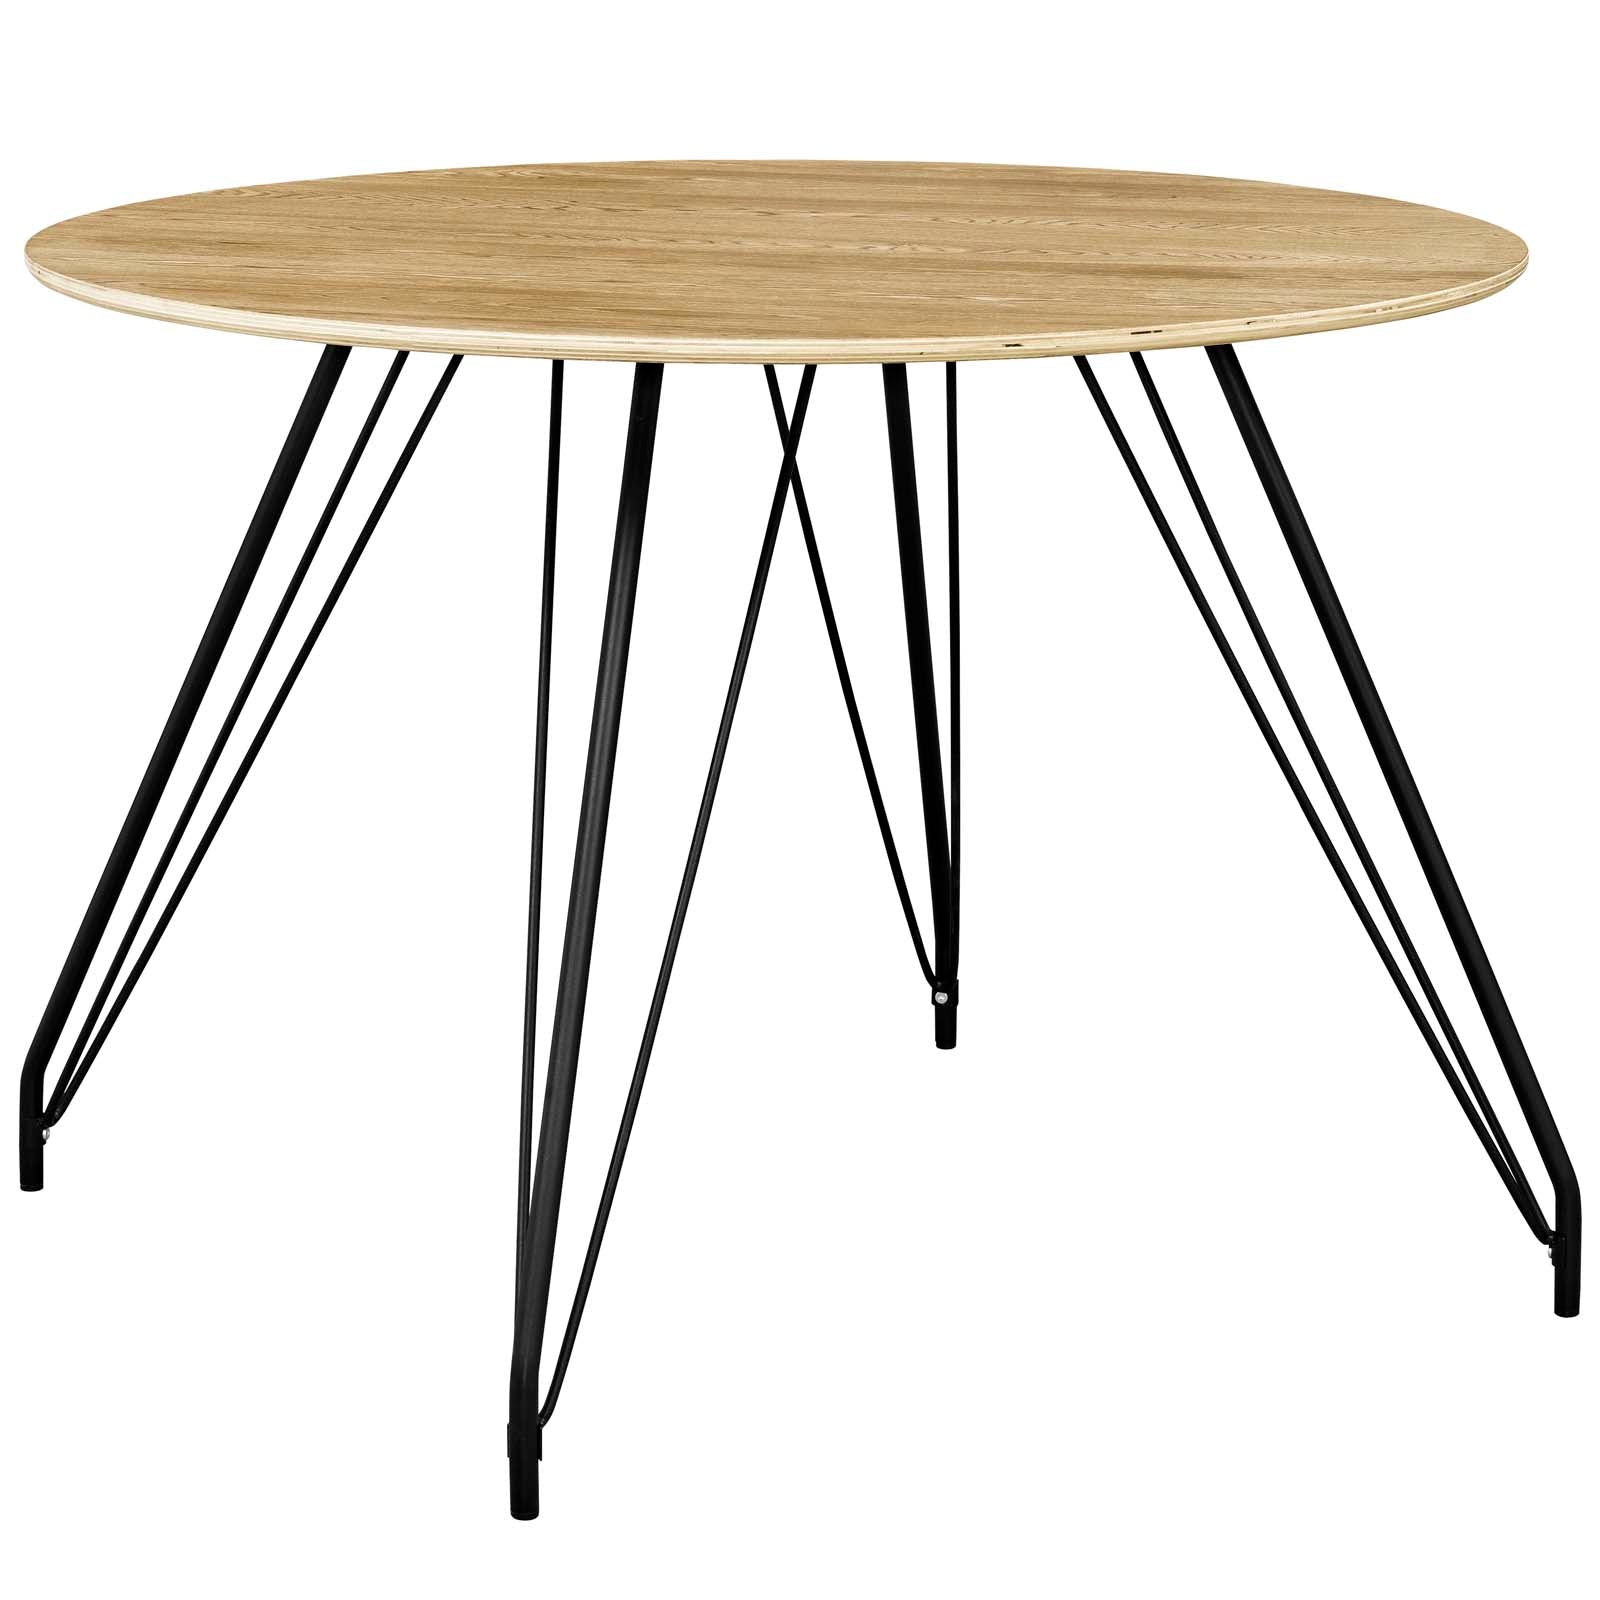 Mid- Century Satellite Circular Dining Table - Modern Kitchen And Dining Table Set